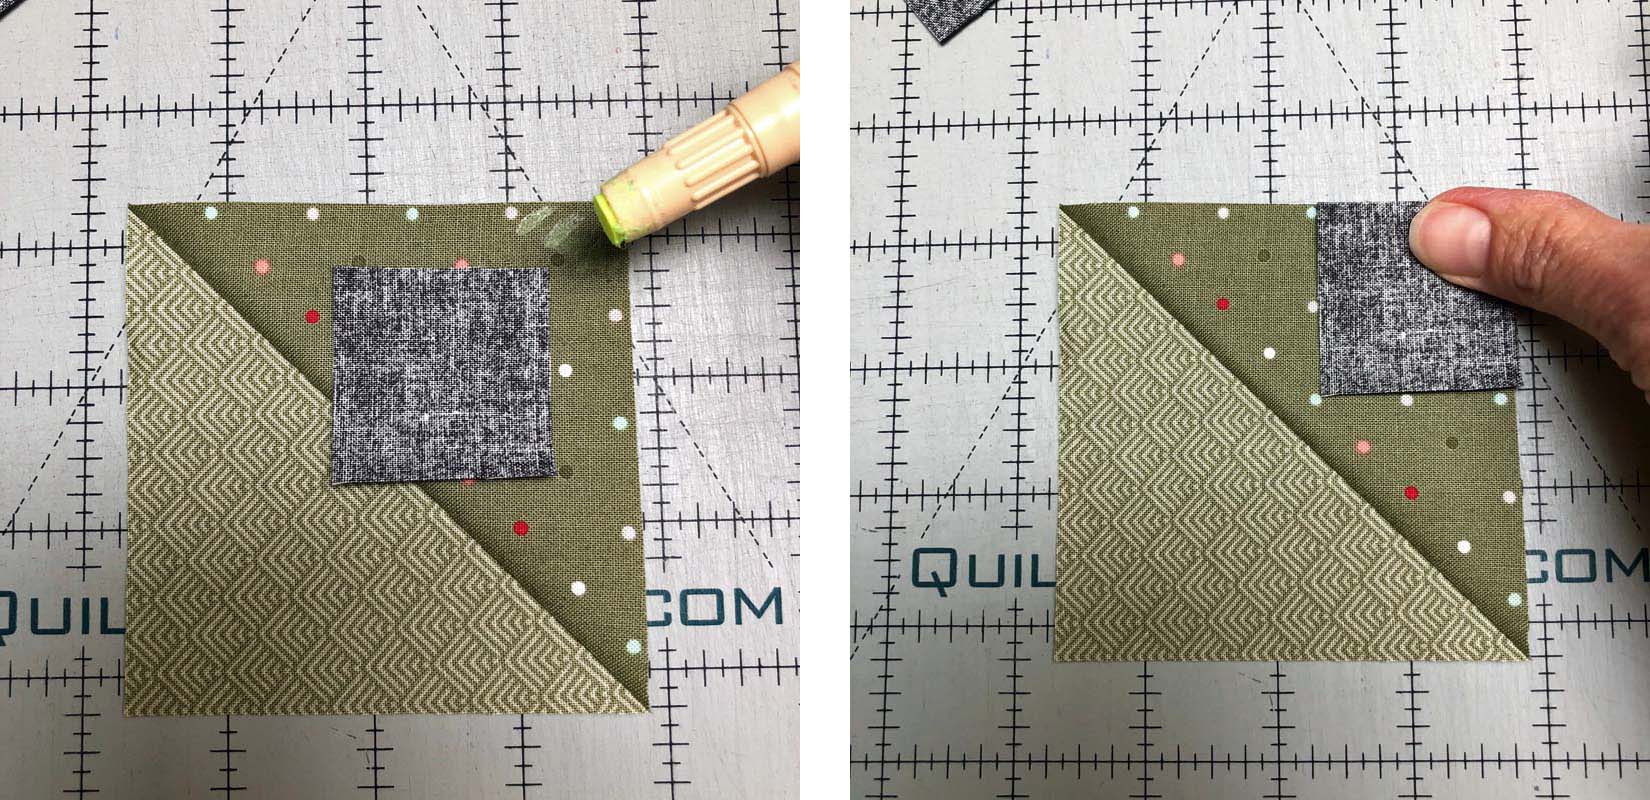 Stitch and flip tip number 1 - use a glue stick instead of pins to hold squares in place.